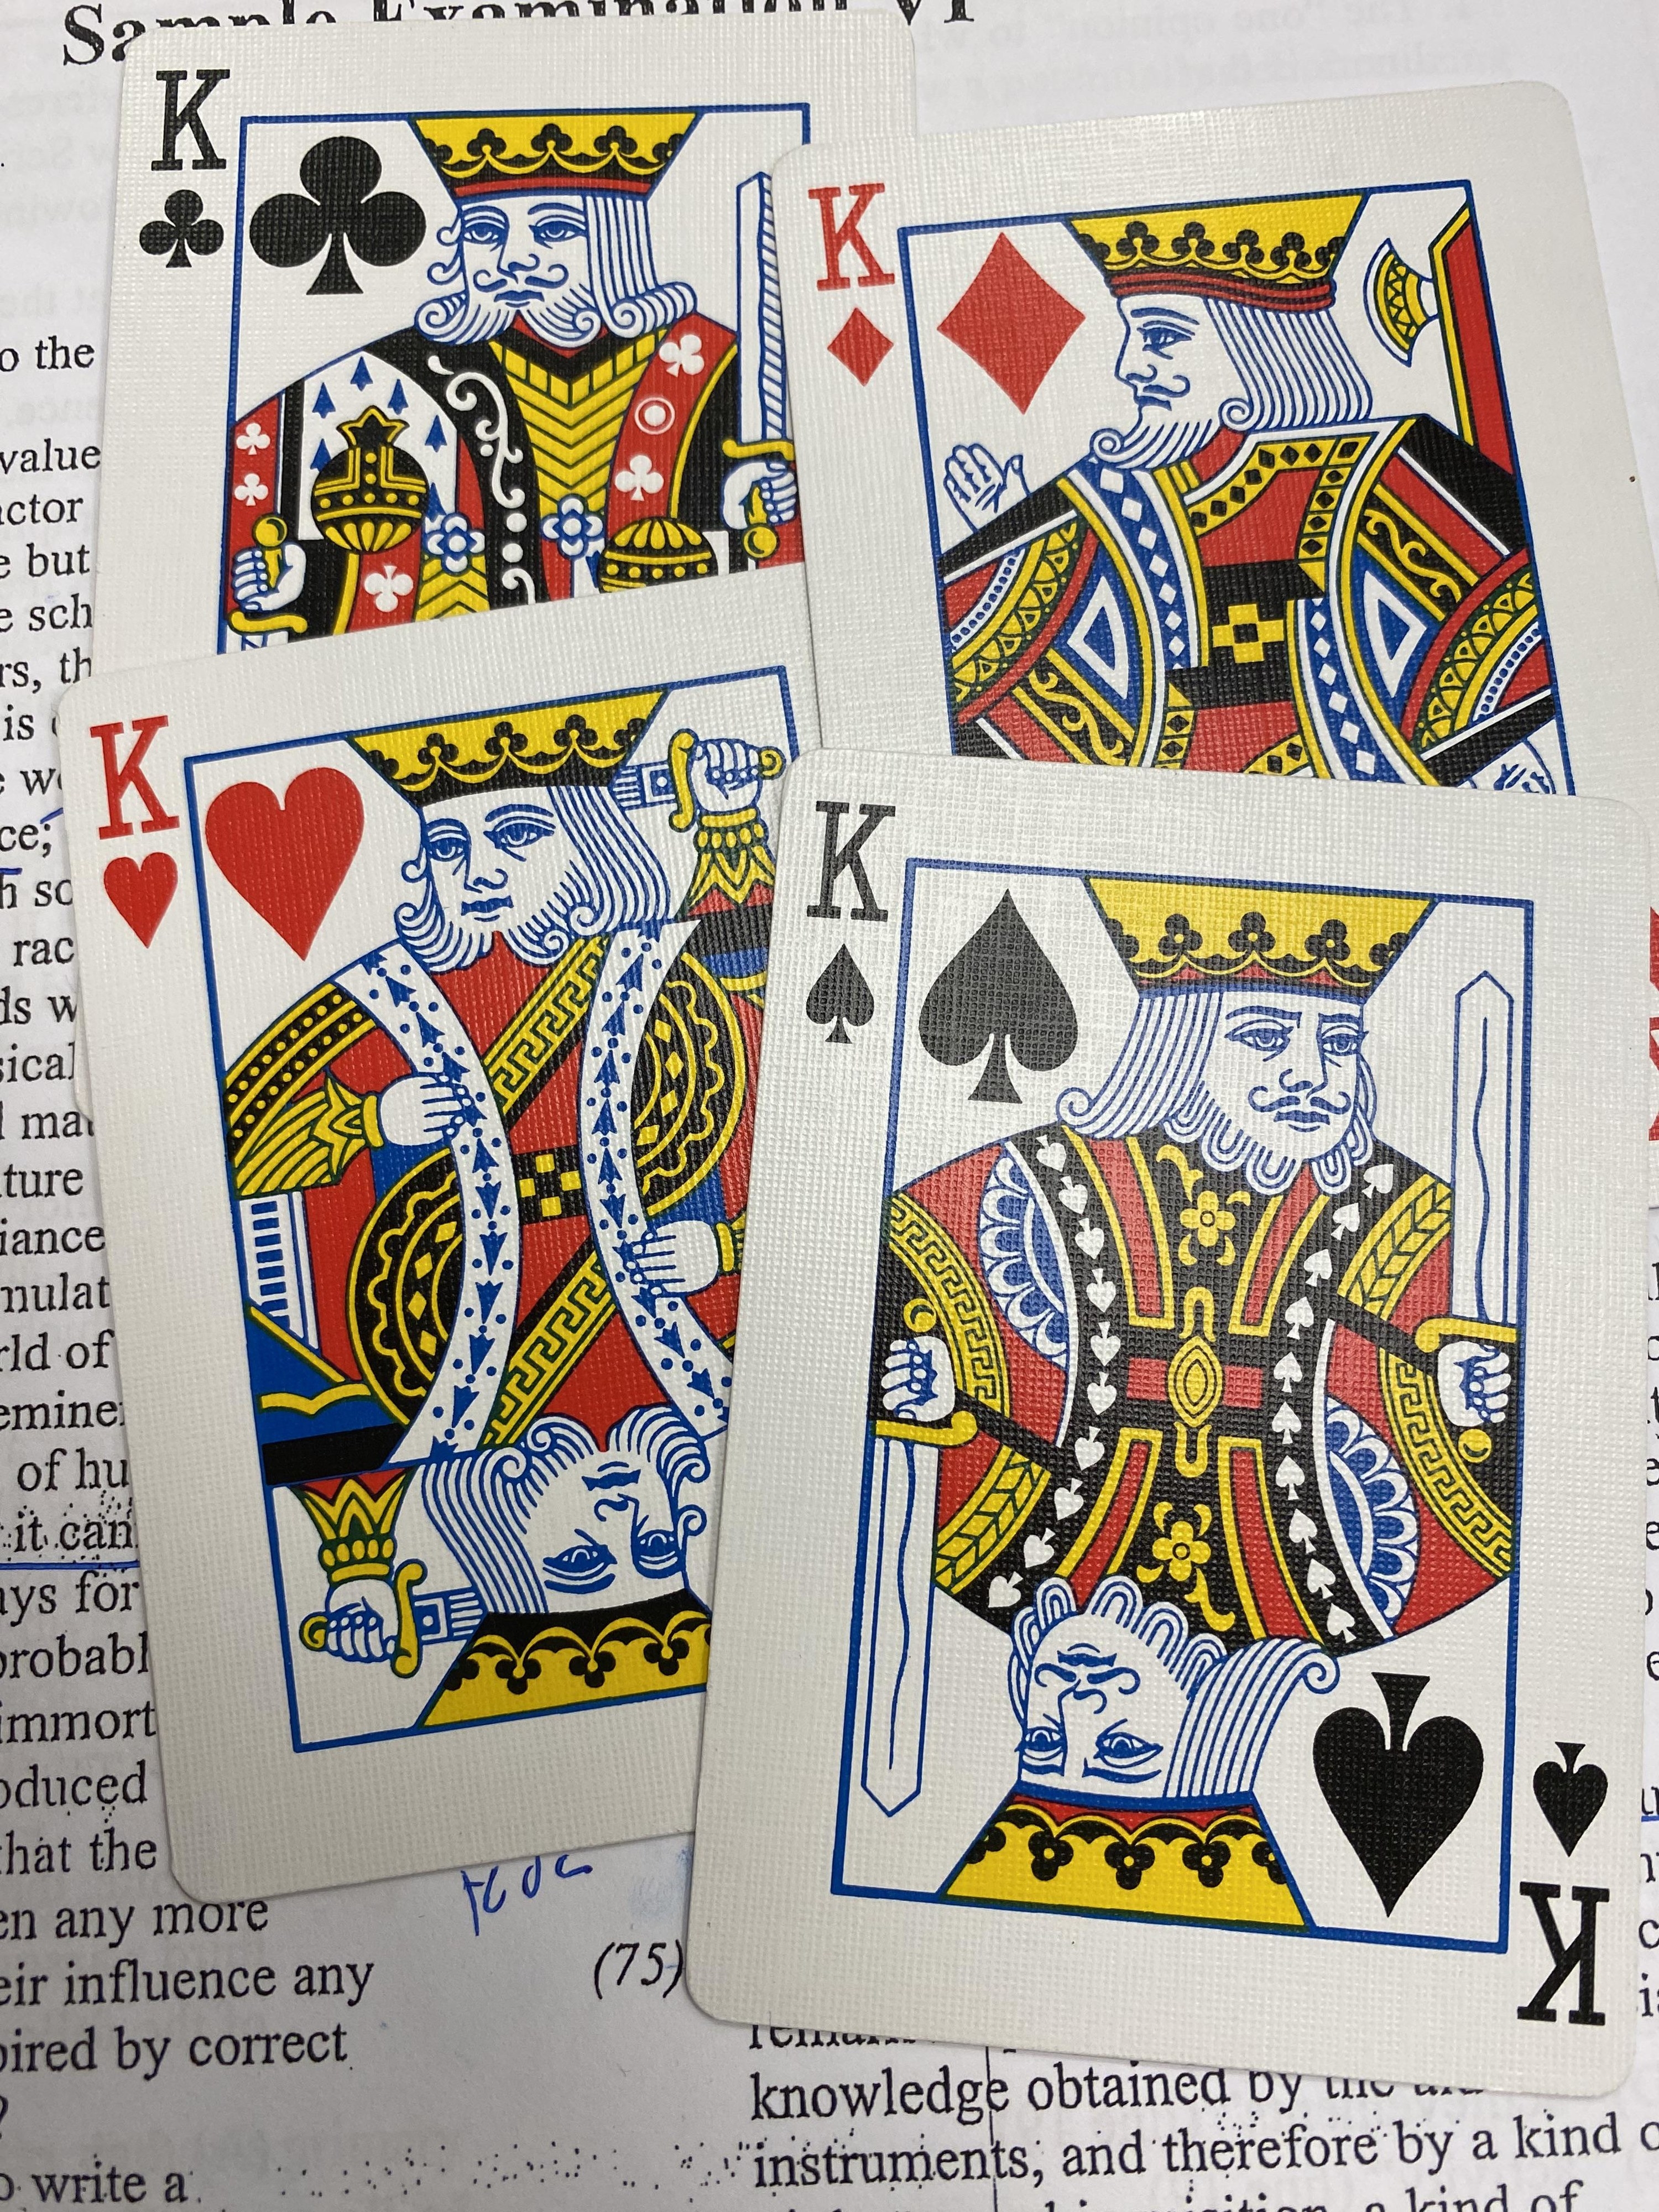 King cards